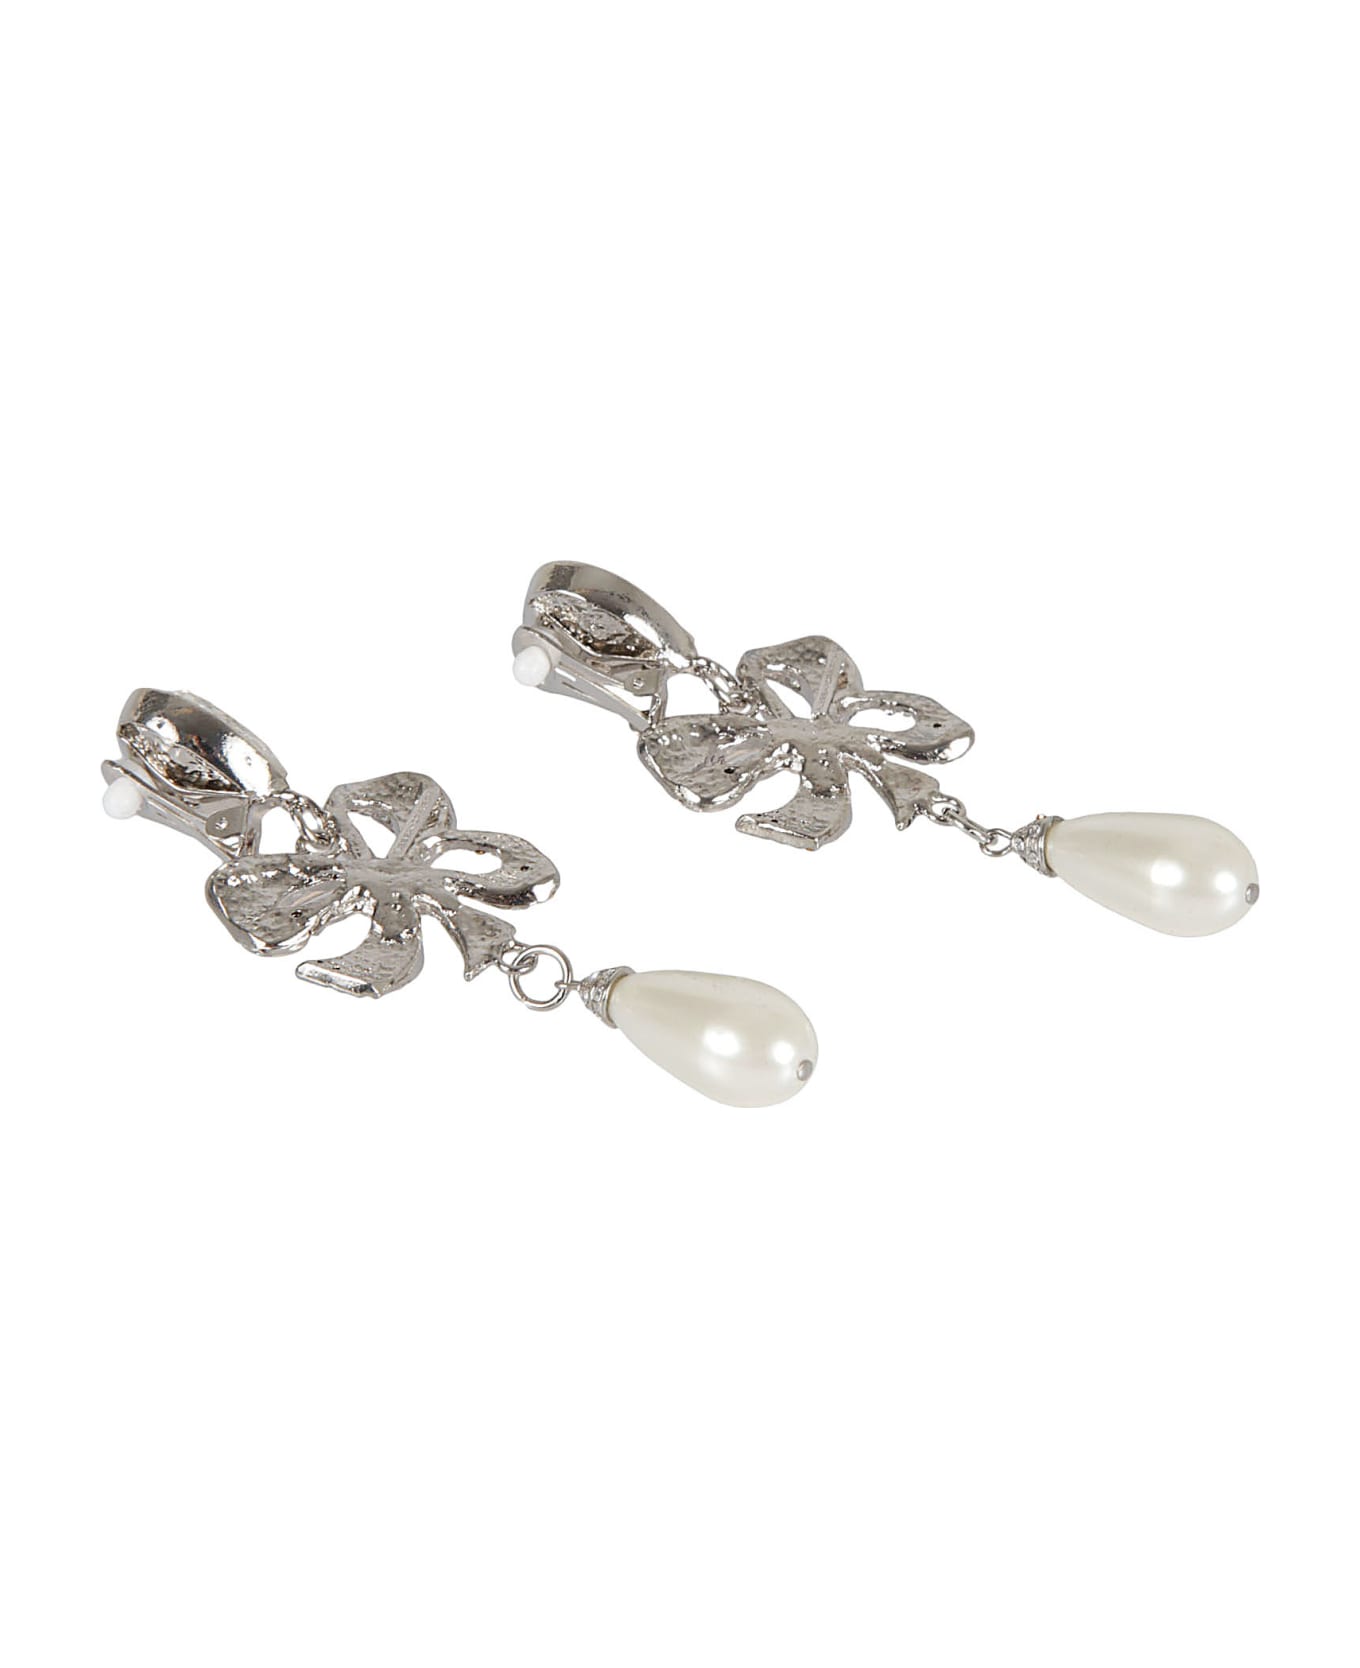 Alessandra Rich Diamond & Pearl Embellished Earrings - Cry-silver